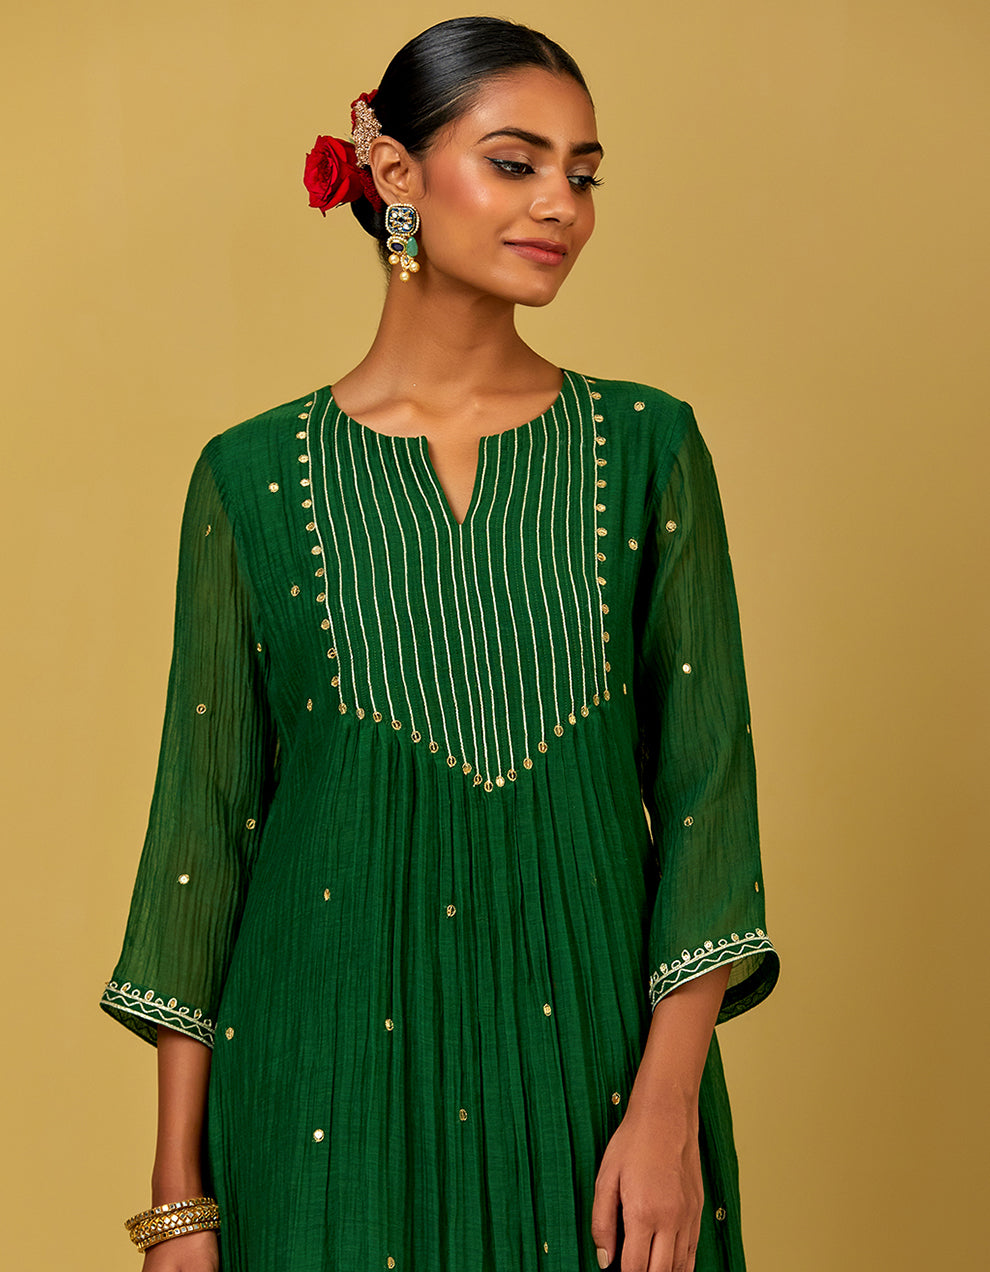 Green Embroidered Chanderi Kurta With Cotton Pants